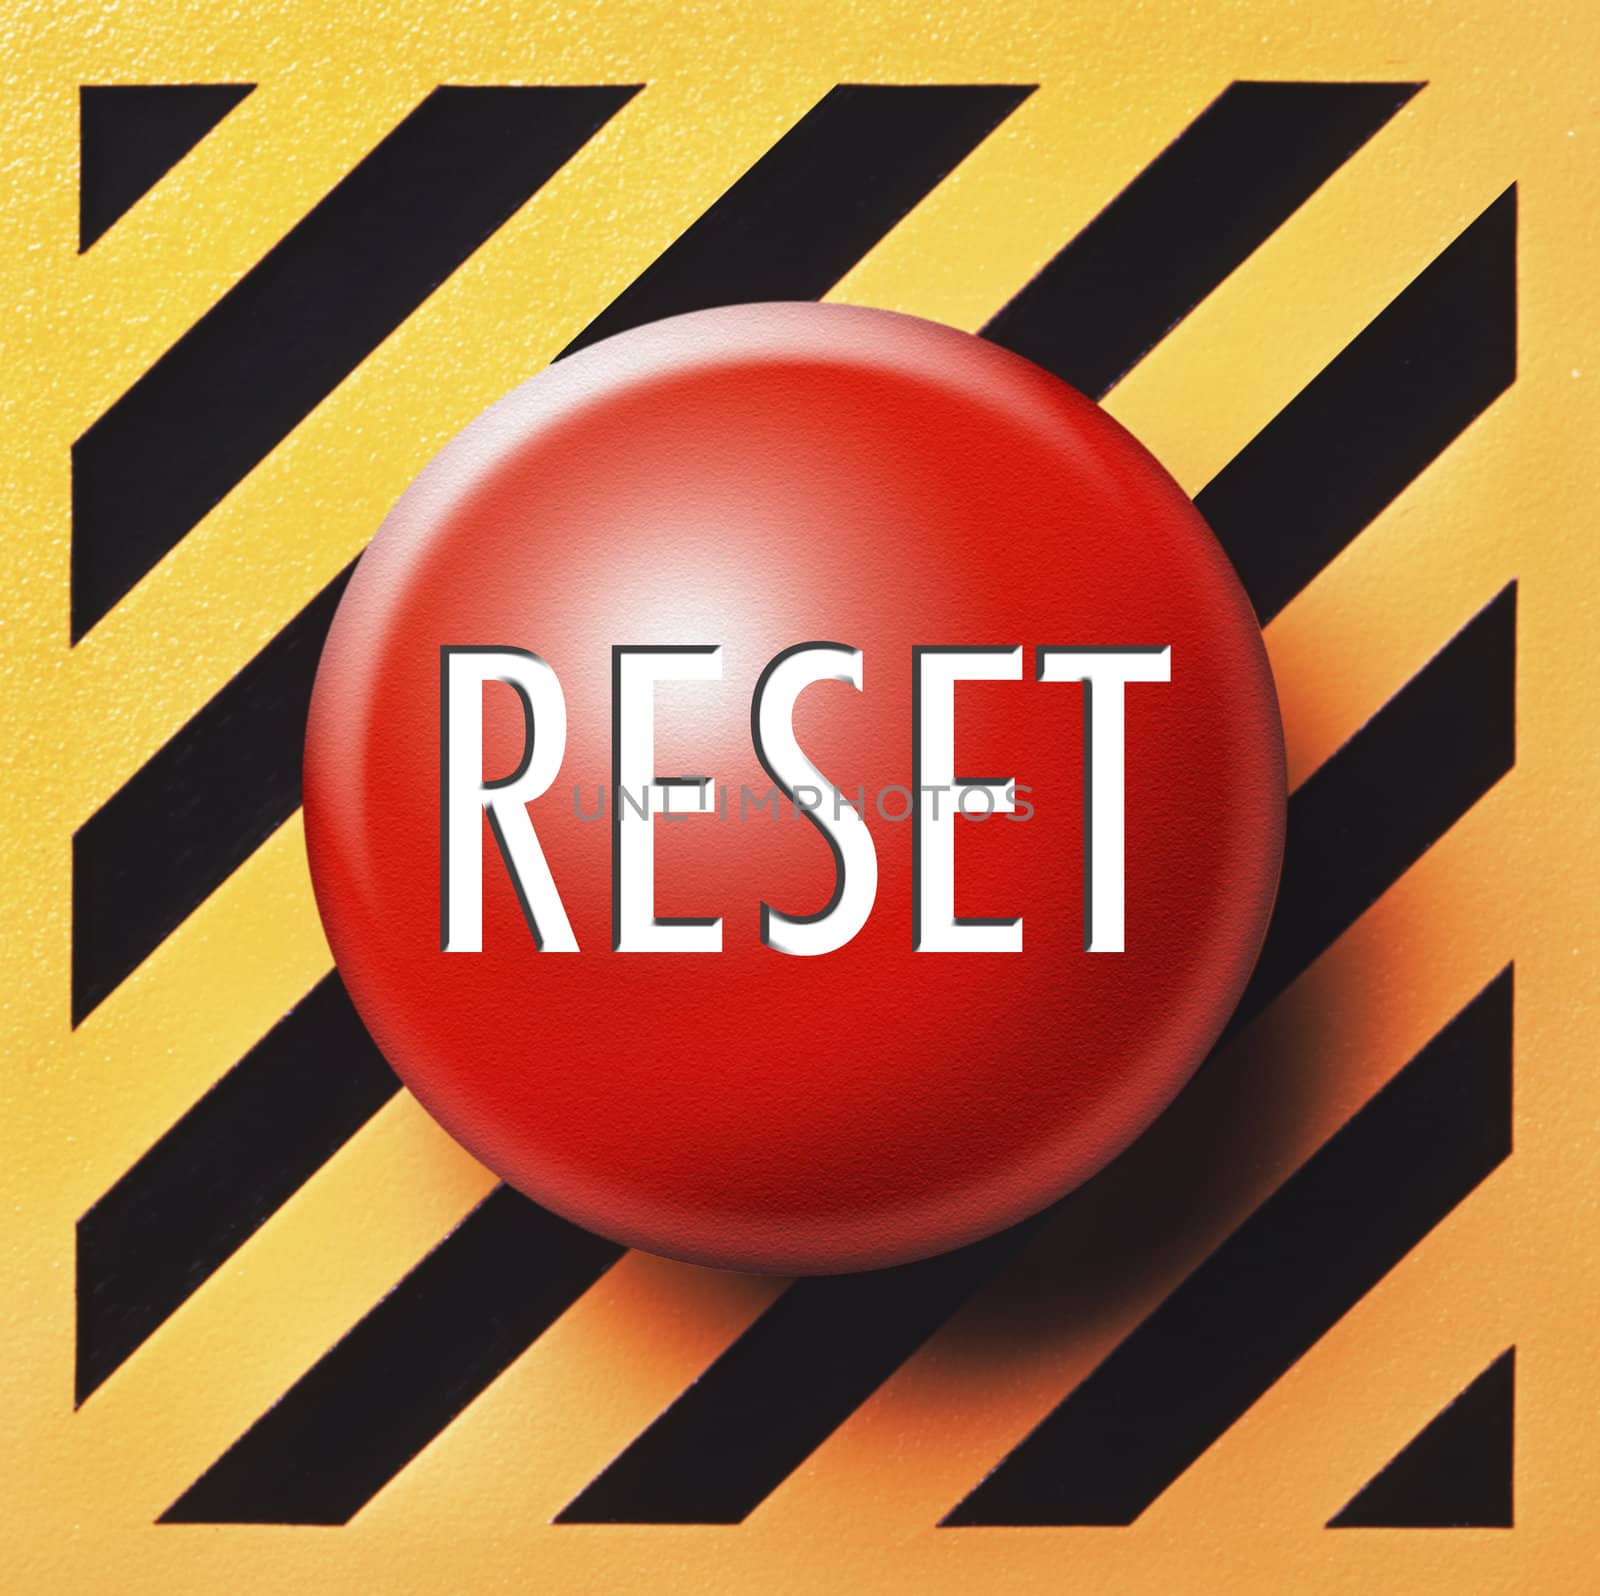 Red reset button by f/2sumicron